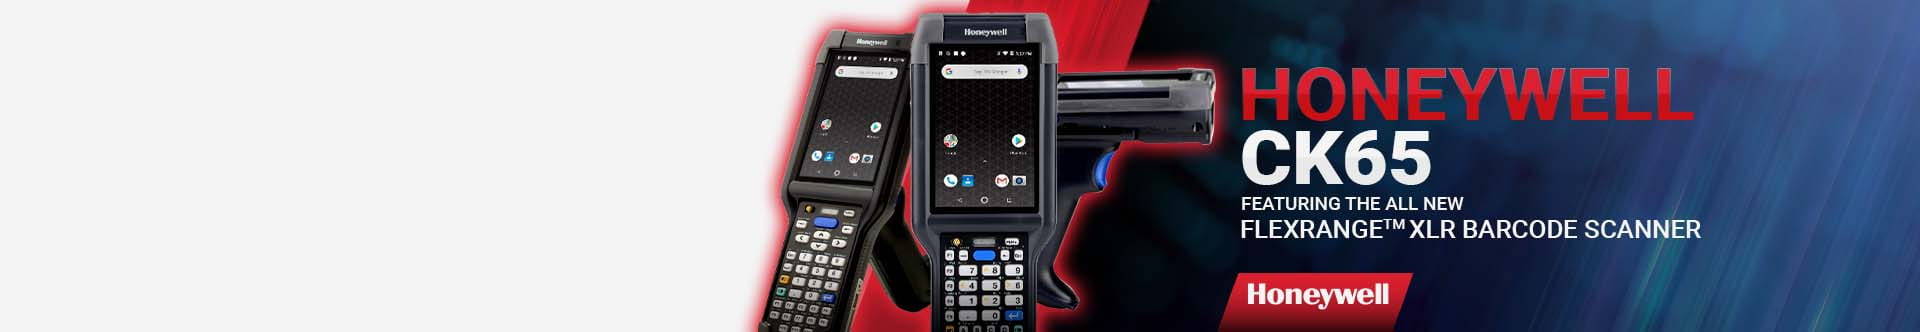 Honeywell CK65 Mobile Computer featuring the all new Flexrange XLR Barcode Scanner